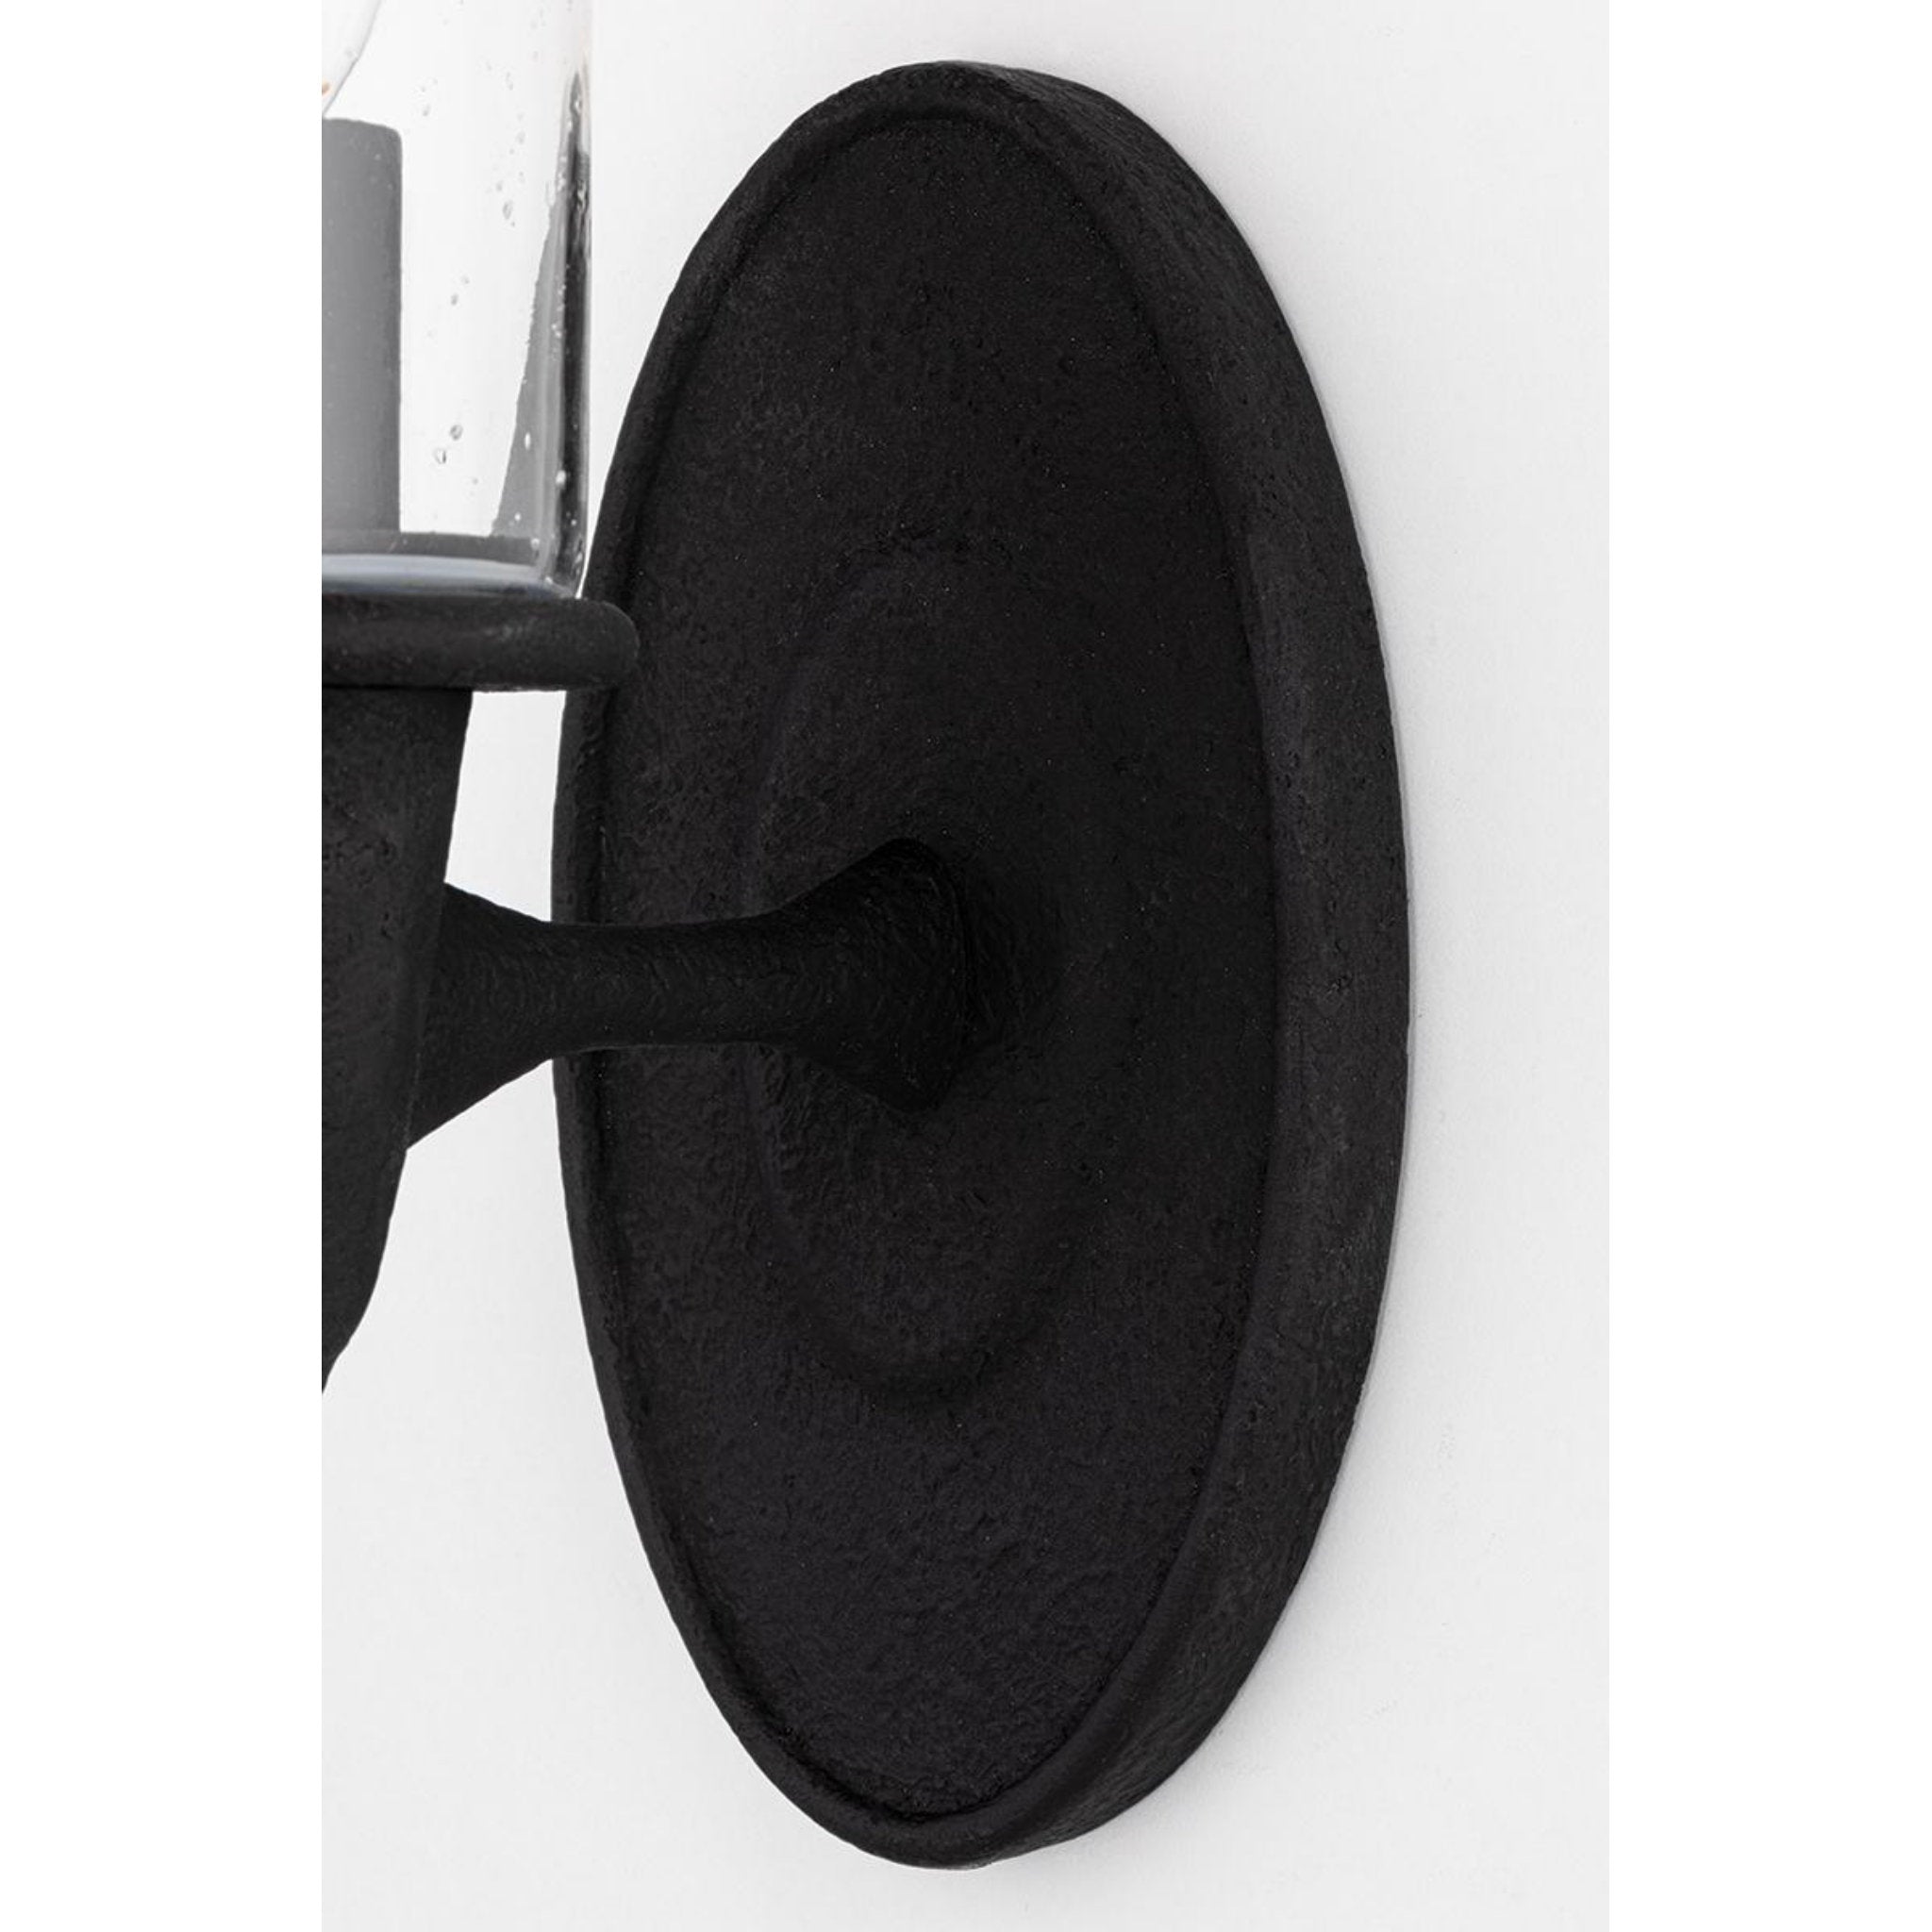 Chisel 1 Light Wall Sconce in Black Iron